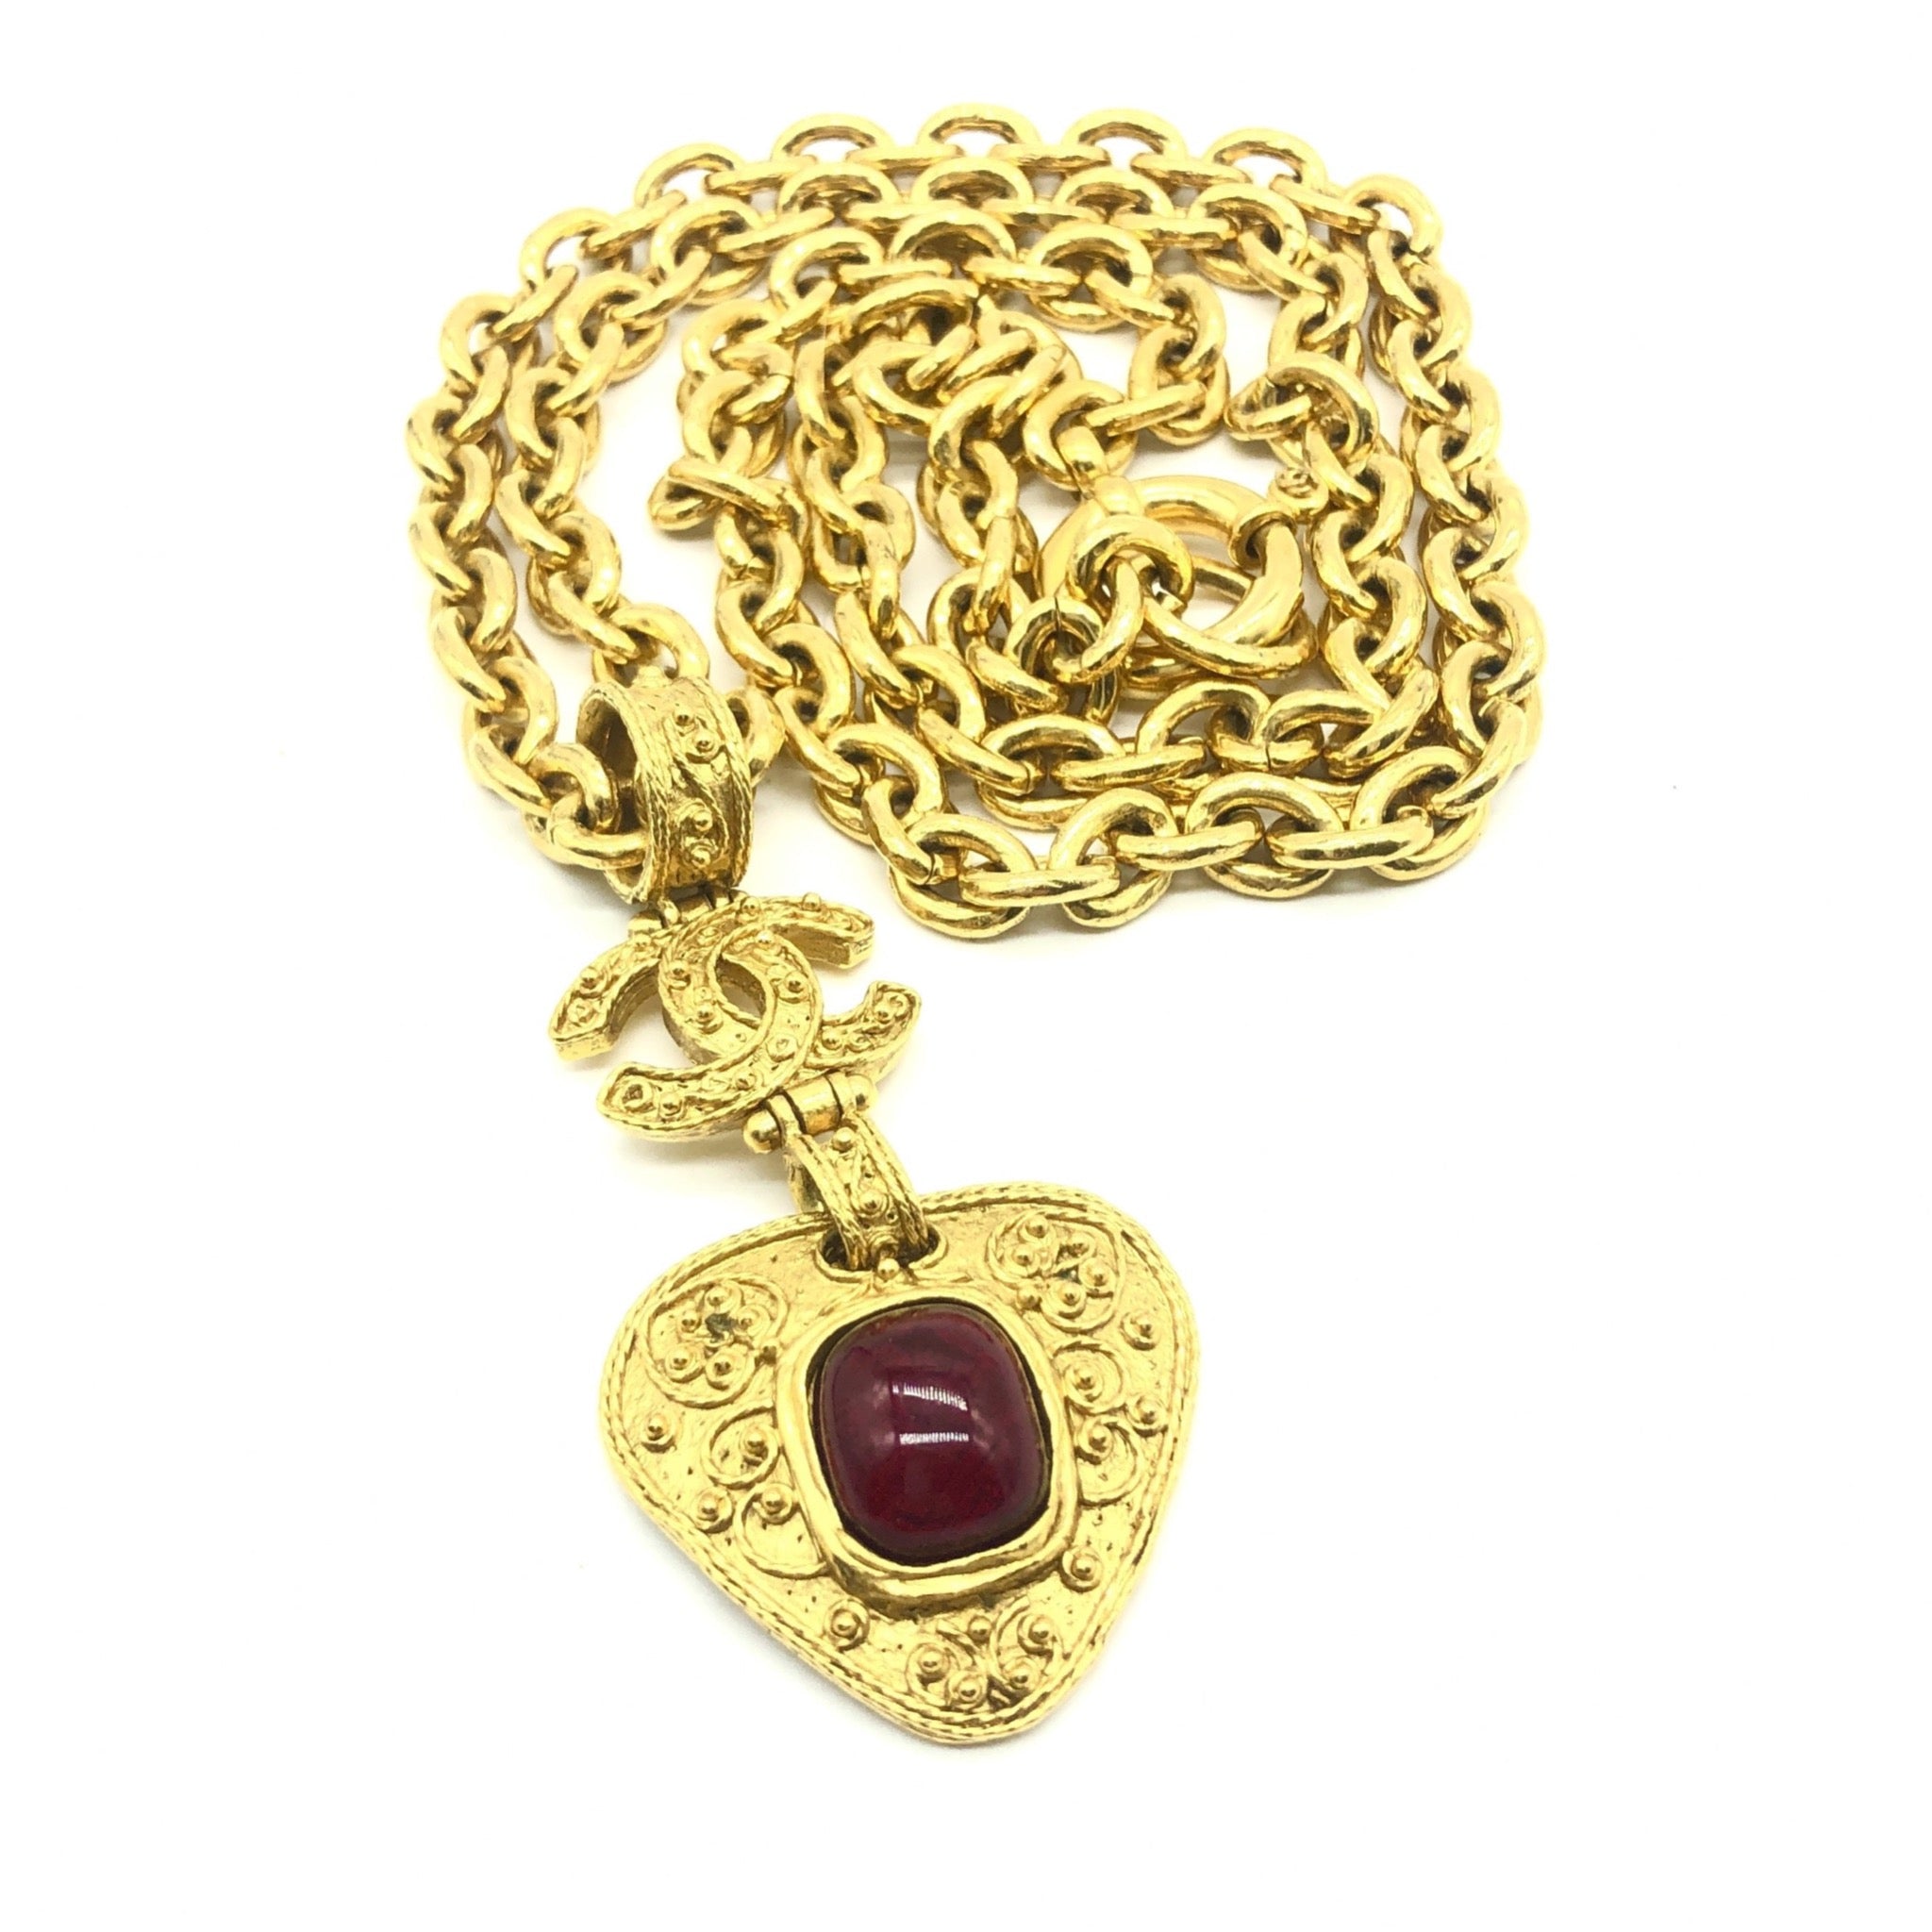 CHANEL+CHOKER+Necklace+Brushed+Finish+Jewel+Pendant+Deep+Red+Velvet+Gold+Chain